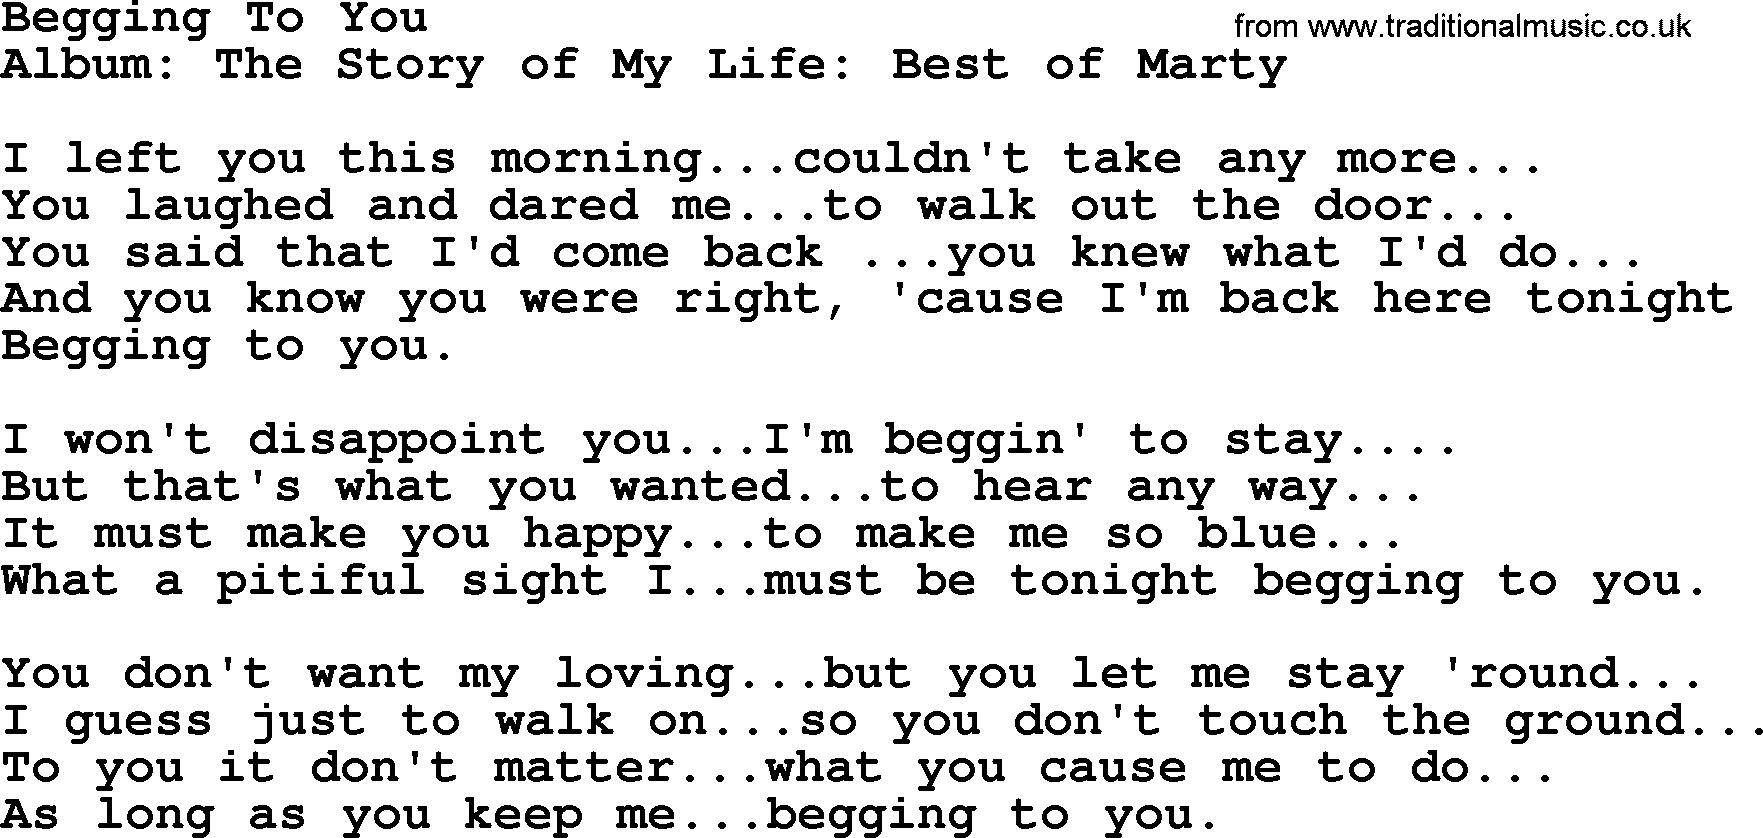 Begging To You By Marty Robbins Lyrics